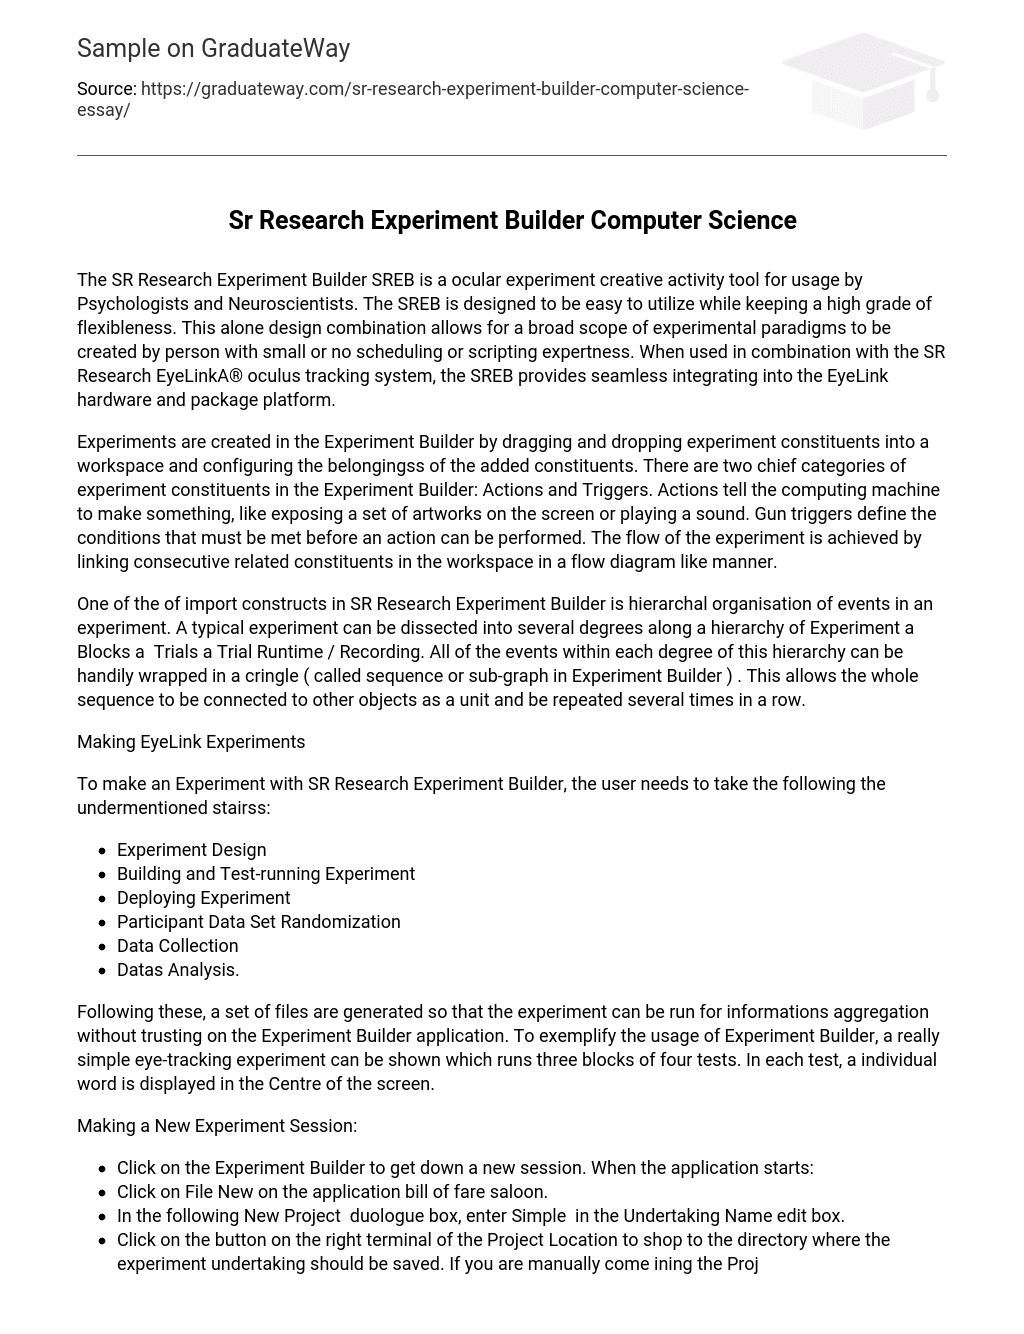 Sr Research Experiment Builder Computer Science